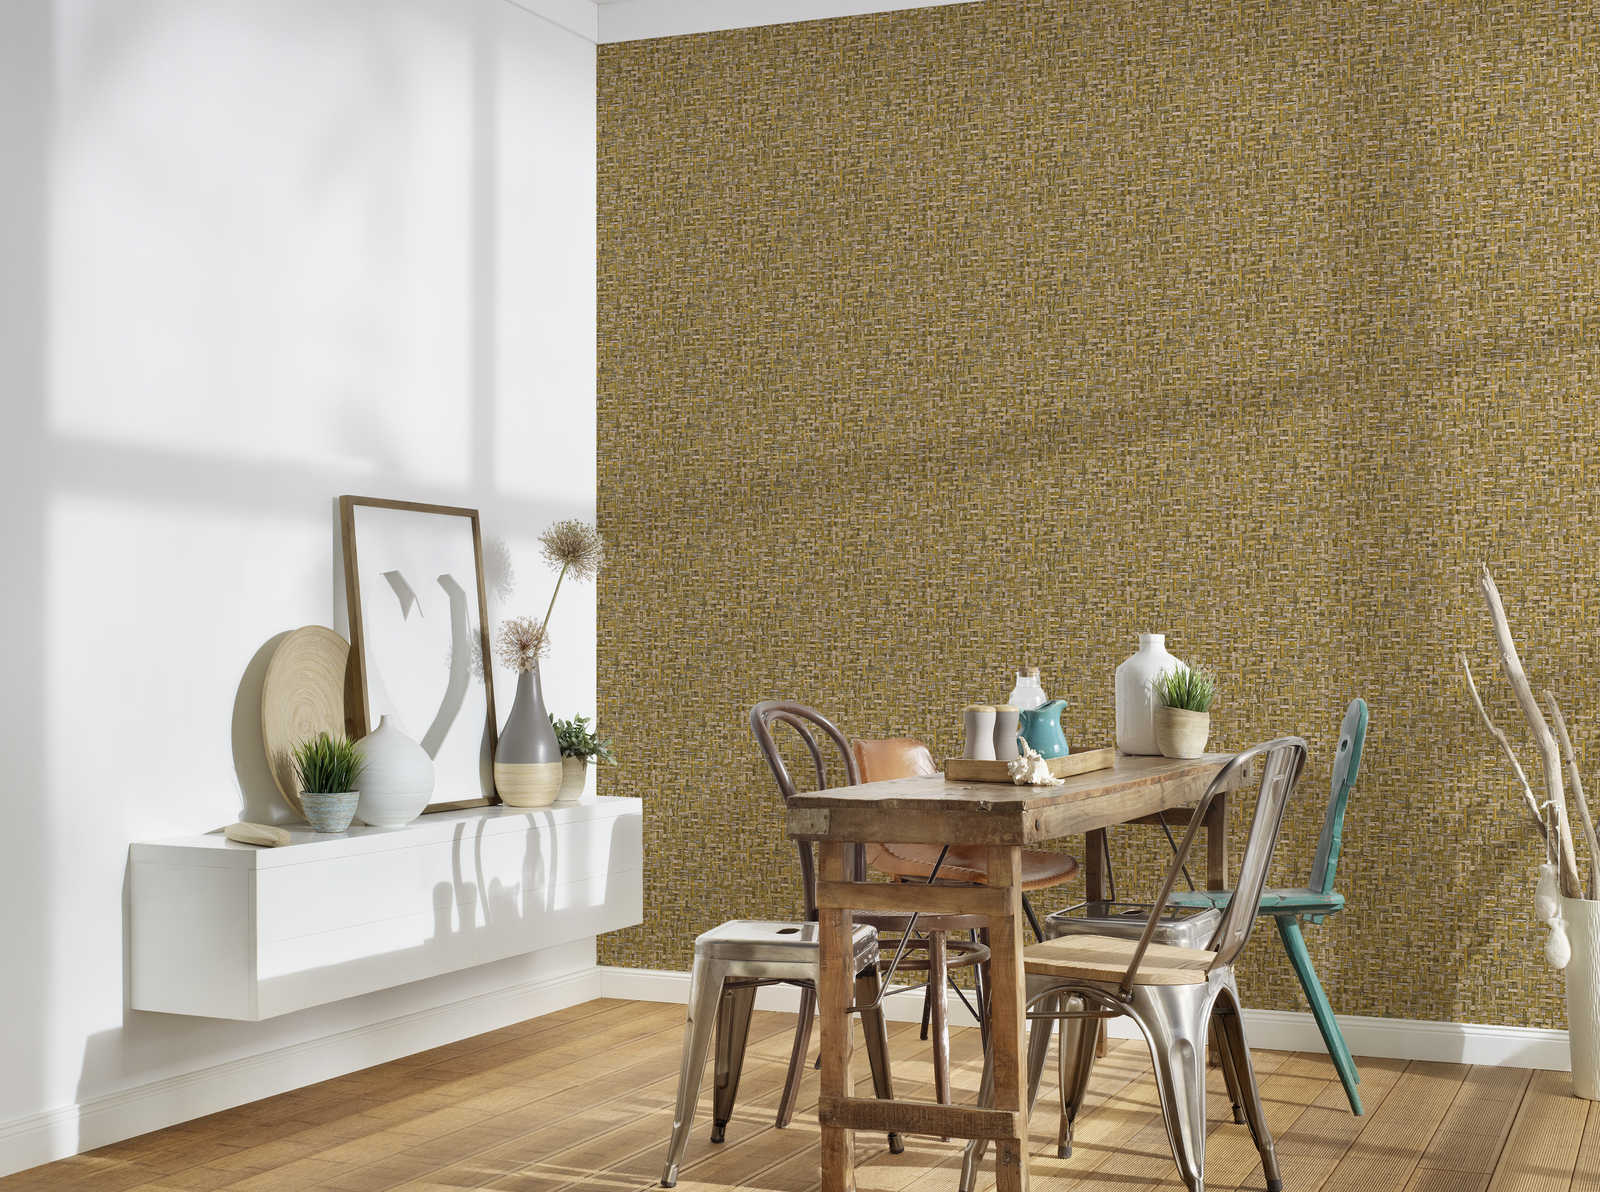             Wallpaper corn yellow with grass weave pattern in nature style - yellow
        